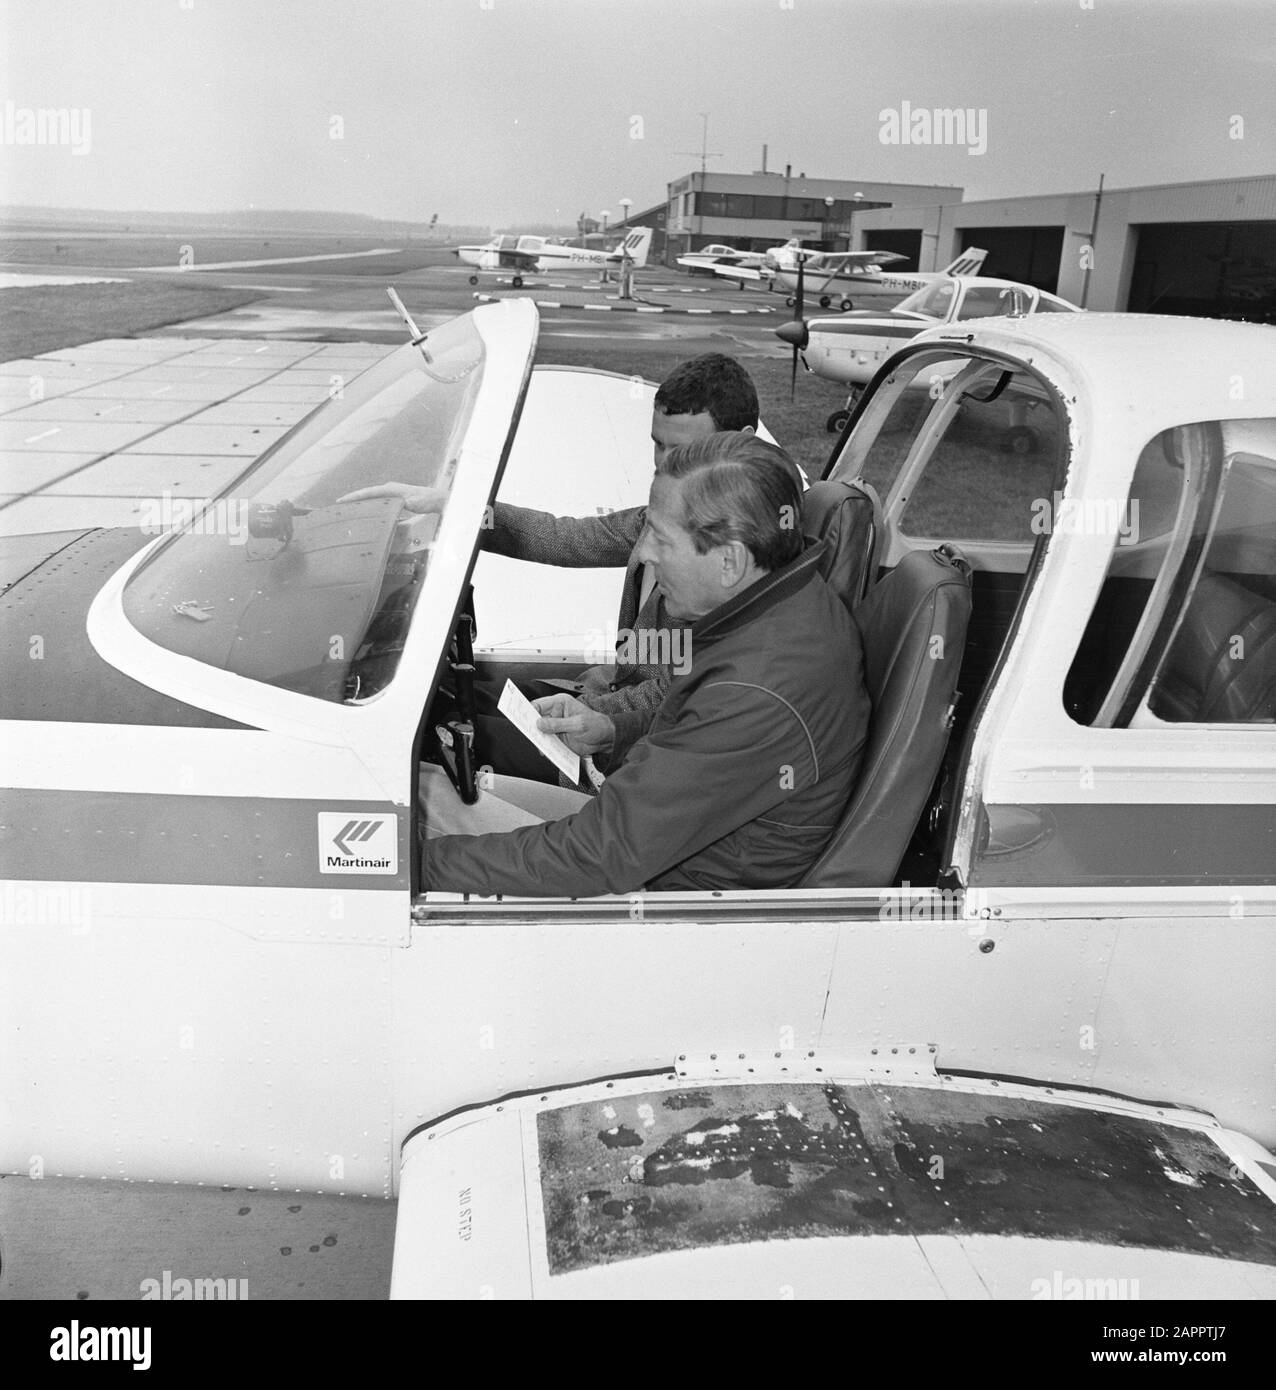 Prince Claus receives (8th) flying lessons at Martinair flight school in Lelystad Date: 20 January 1984 Location: Lelystad Keywords: flying lessons, flying schools Personal name: Claus, prince Institution name : Martinair Stock Photo